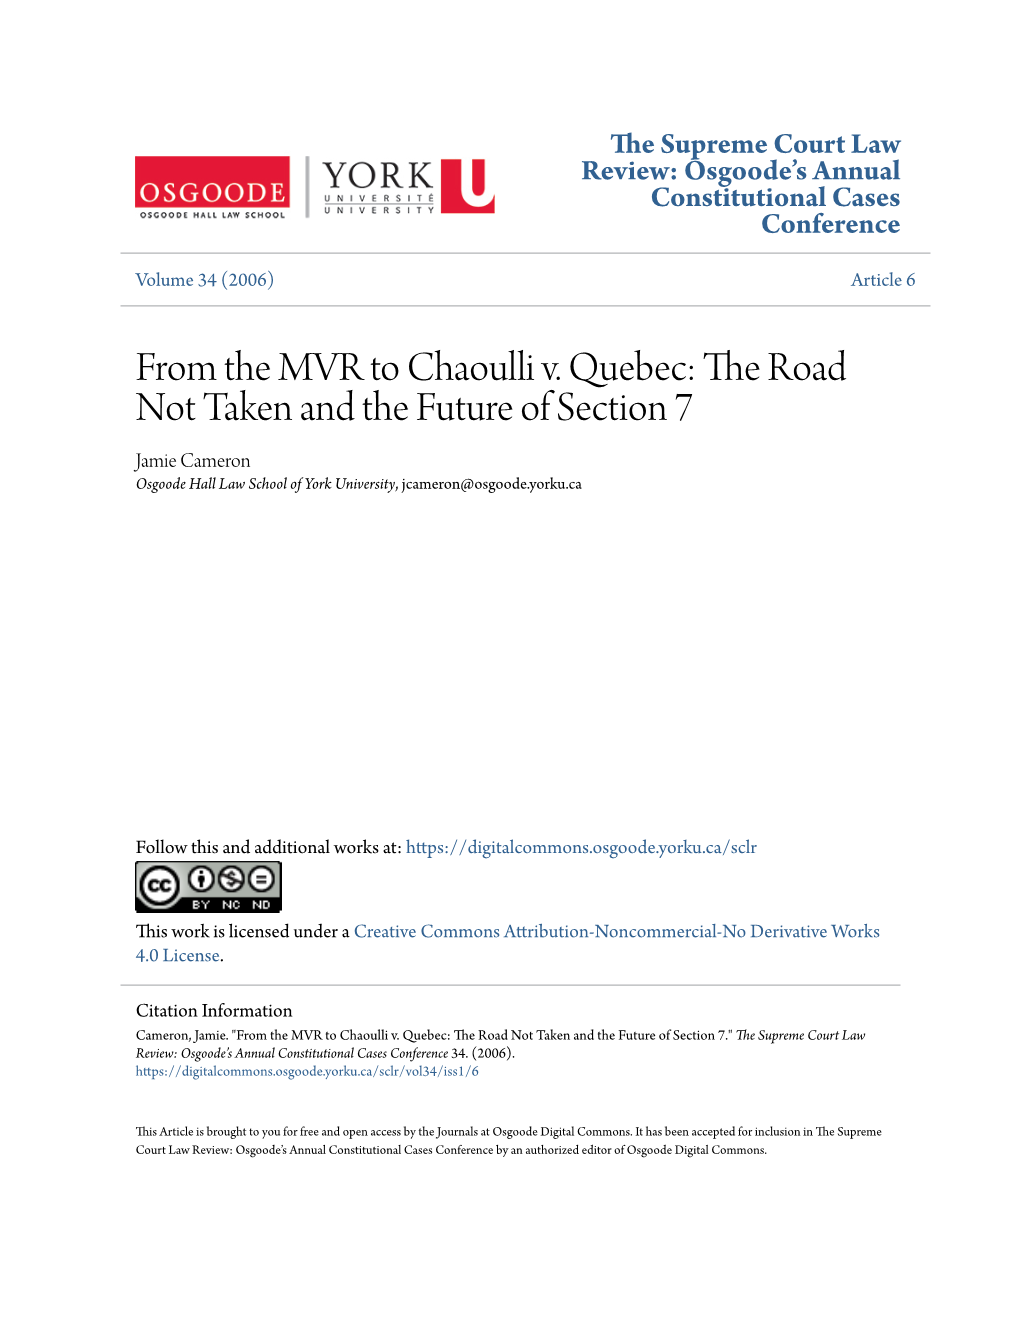 From the MVR to Chaoulli V. Quebec: the Road Not Taken and the Future of Section 7 Jamie Cameron Osgoode Hall Law School of York University, Jcameron@Osgoode.Yorku.Ca